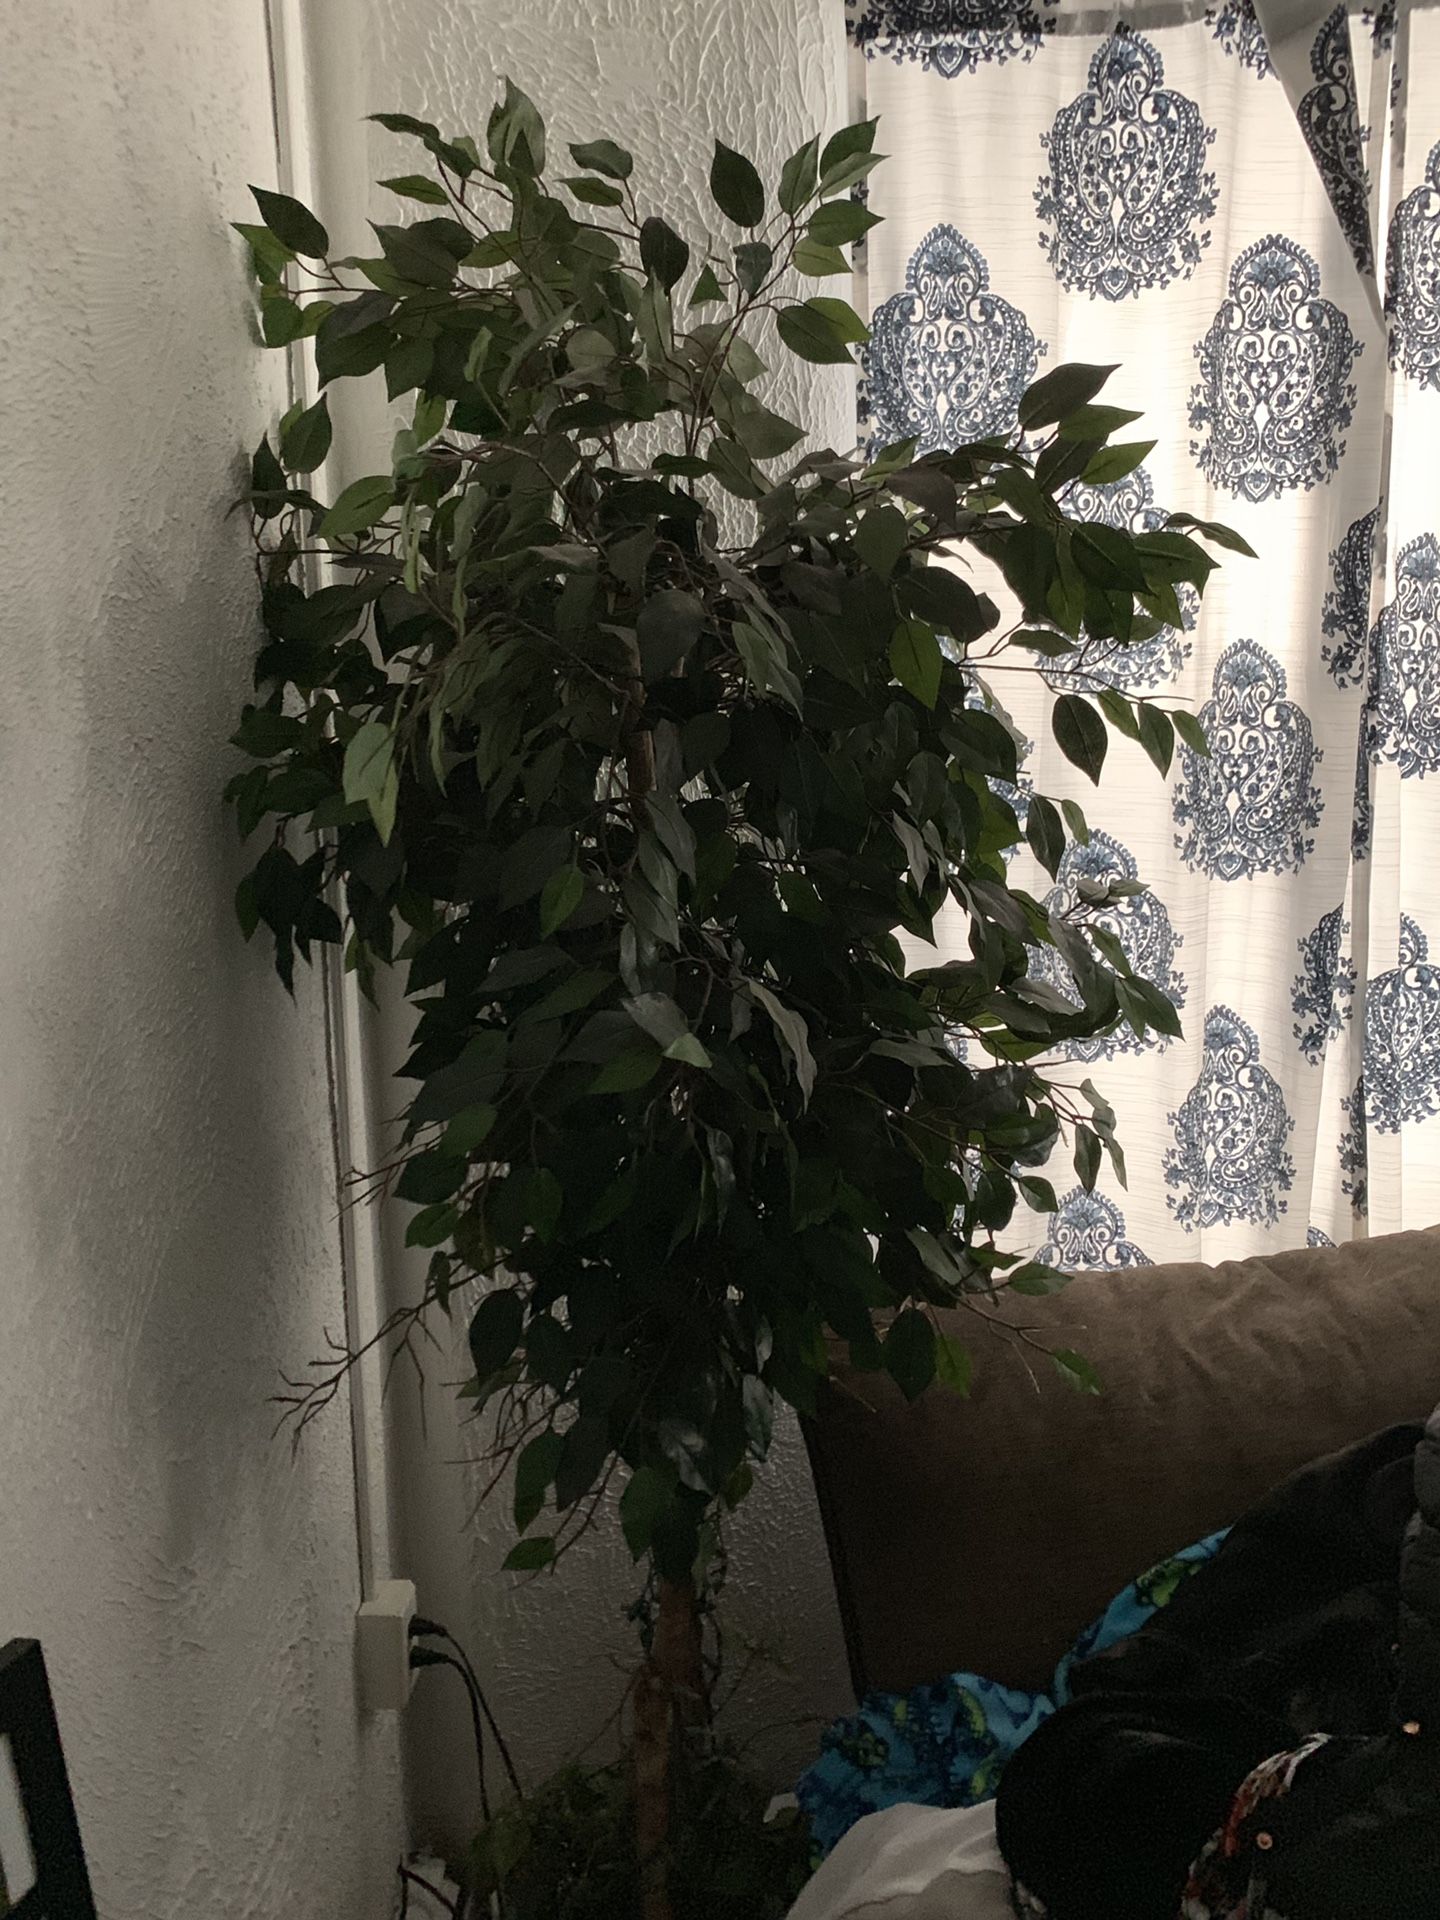 Fake indoor plant with lights